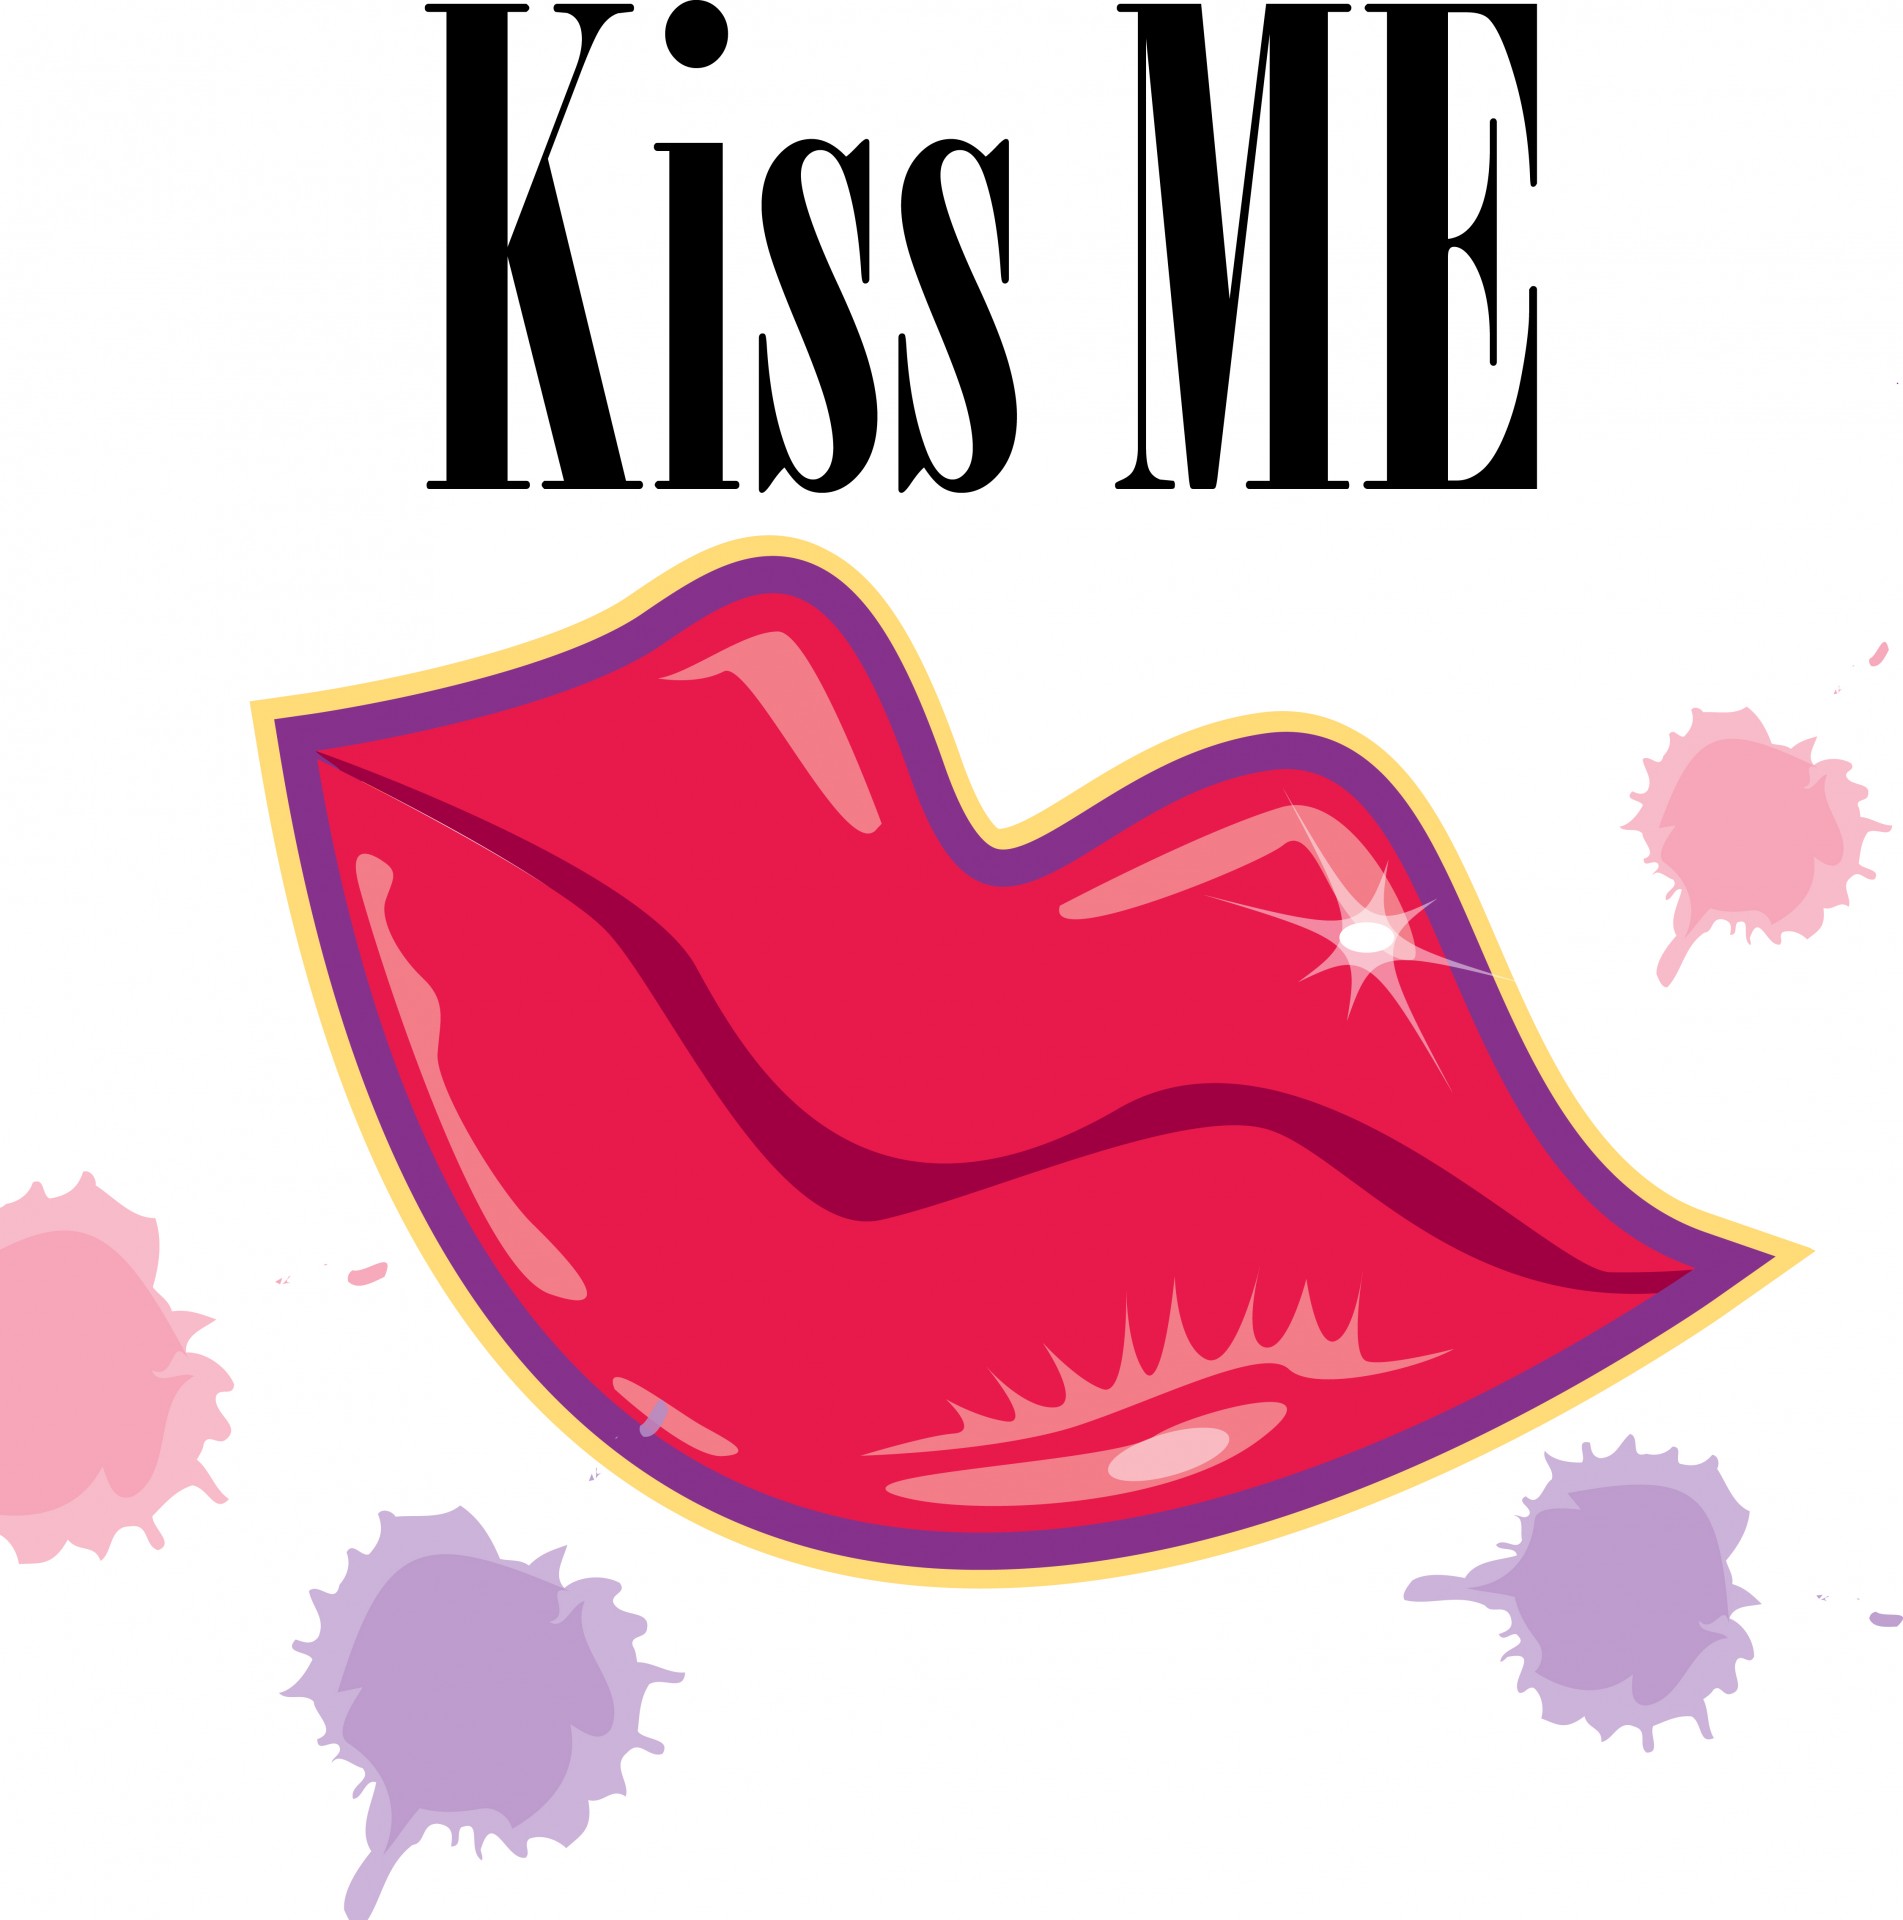 Lips image free download kiss clip art - Cliparting.com